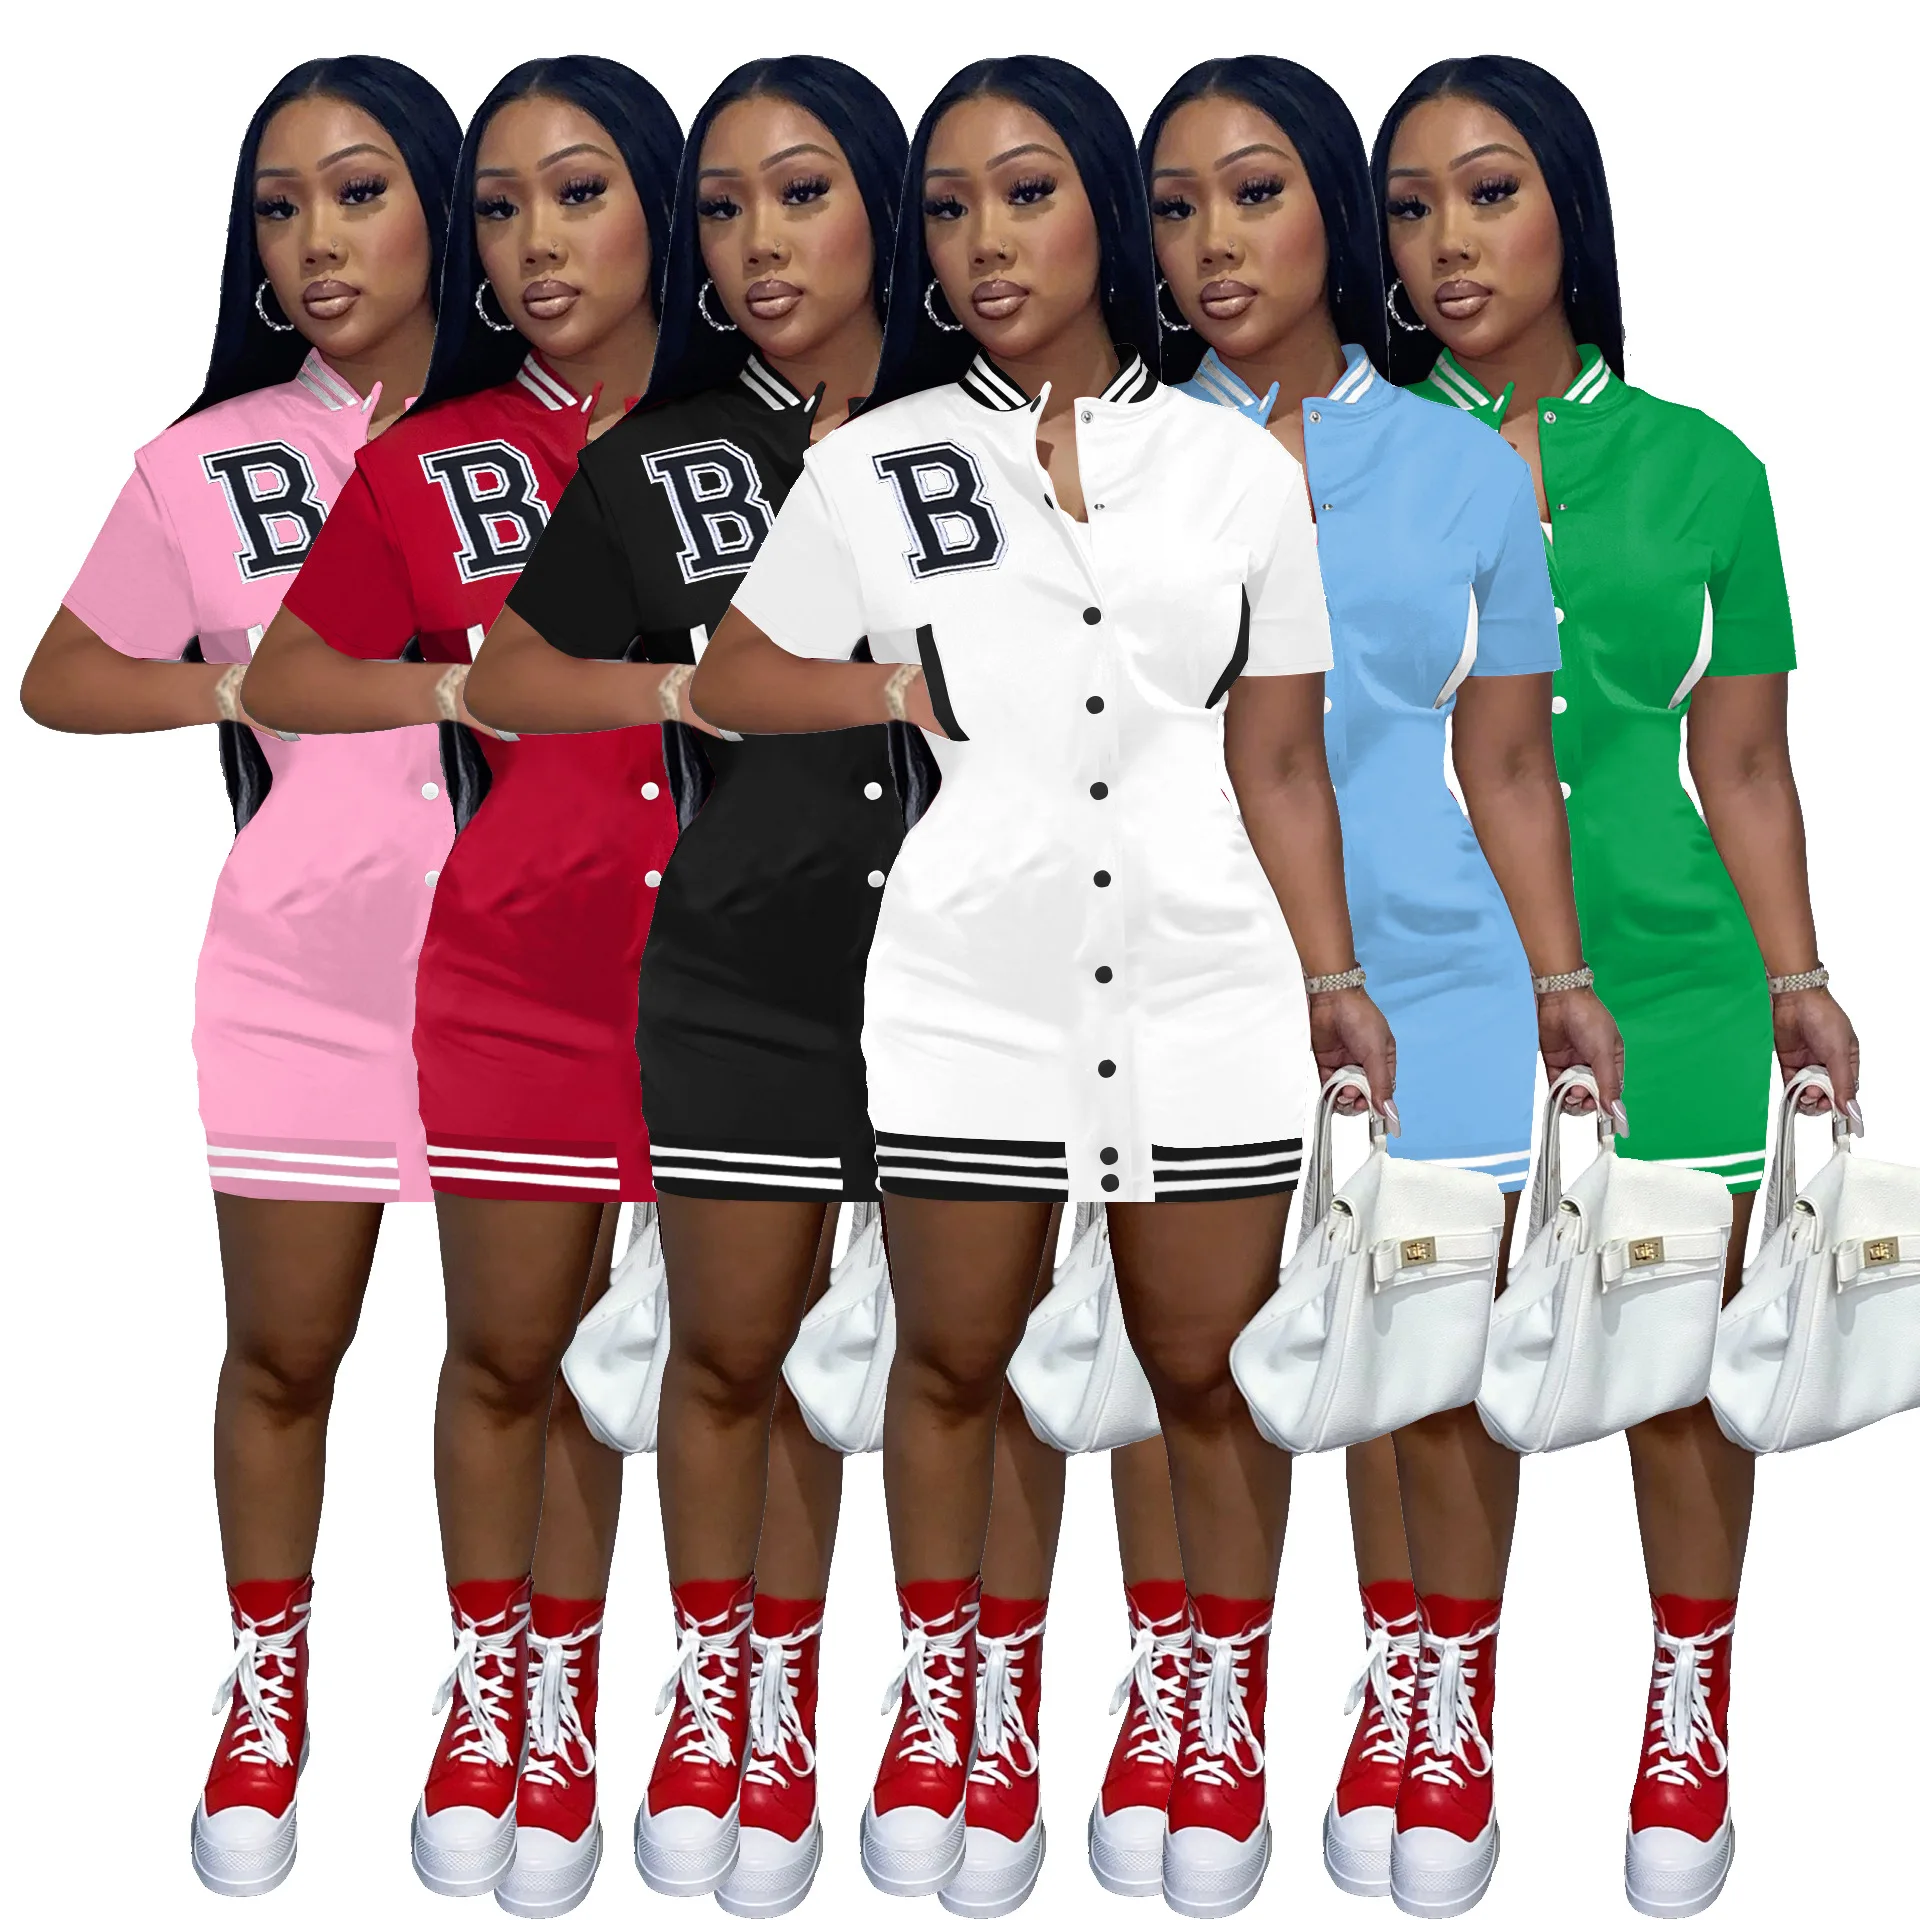 Wholesale Summer Women's Clothing B Embroidered Baseball Uniform Dress  Single Breasted Short Sleeve Casual Women Tshirt Dress From m.